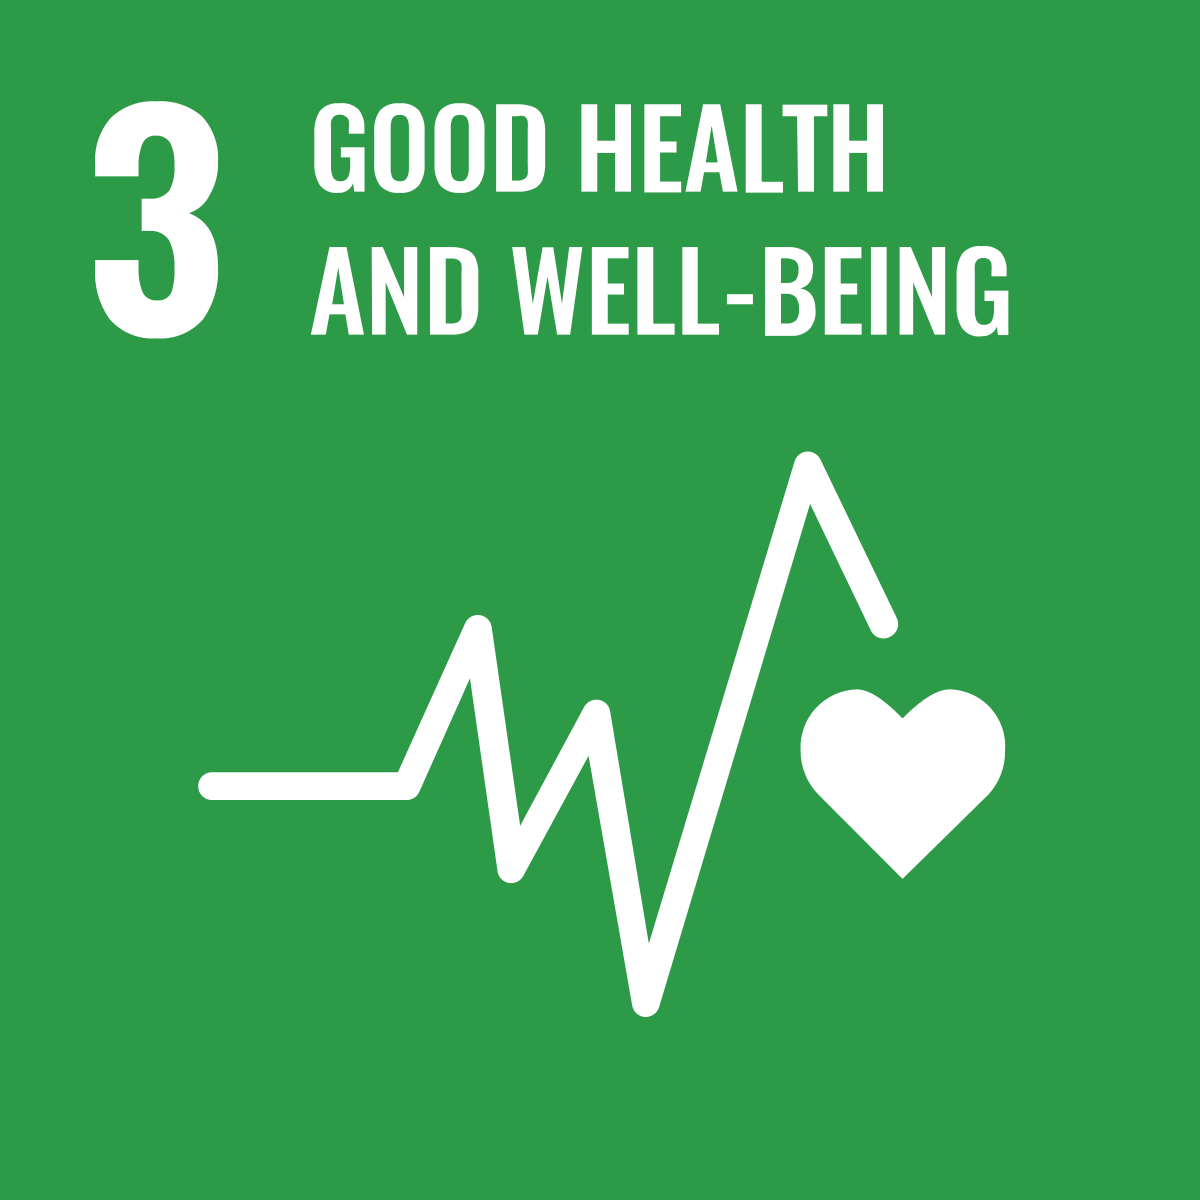 Sustainable Development Goals 3 - Good Health and Well-Being